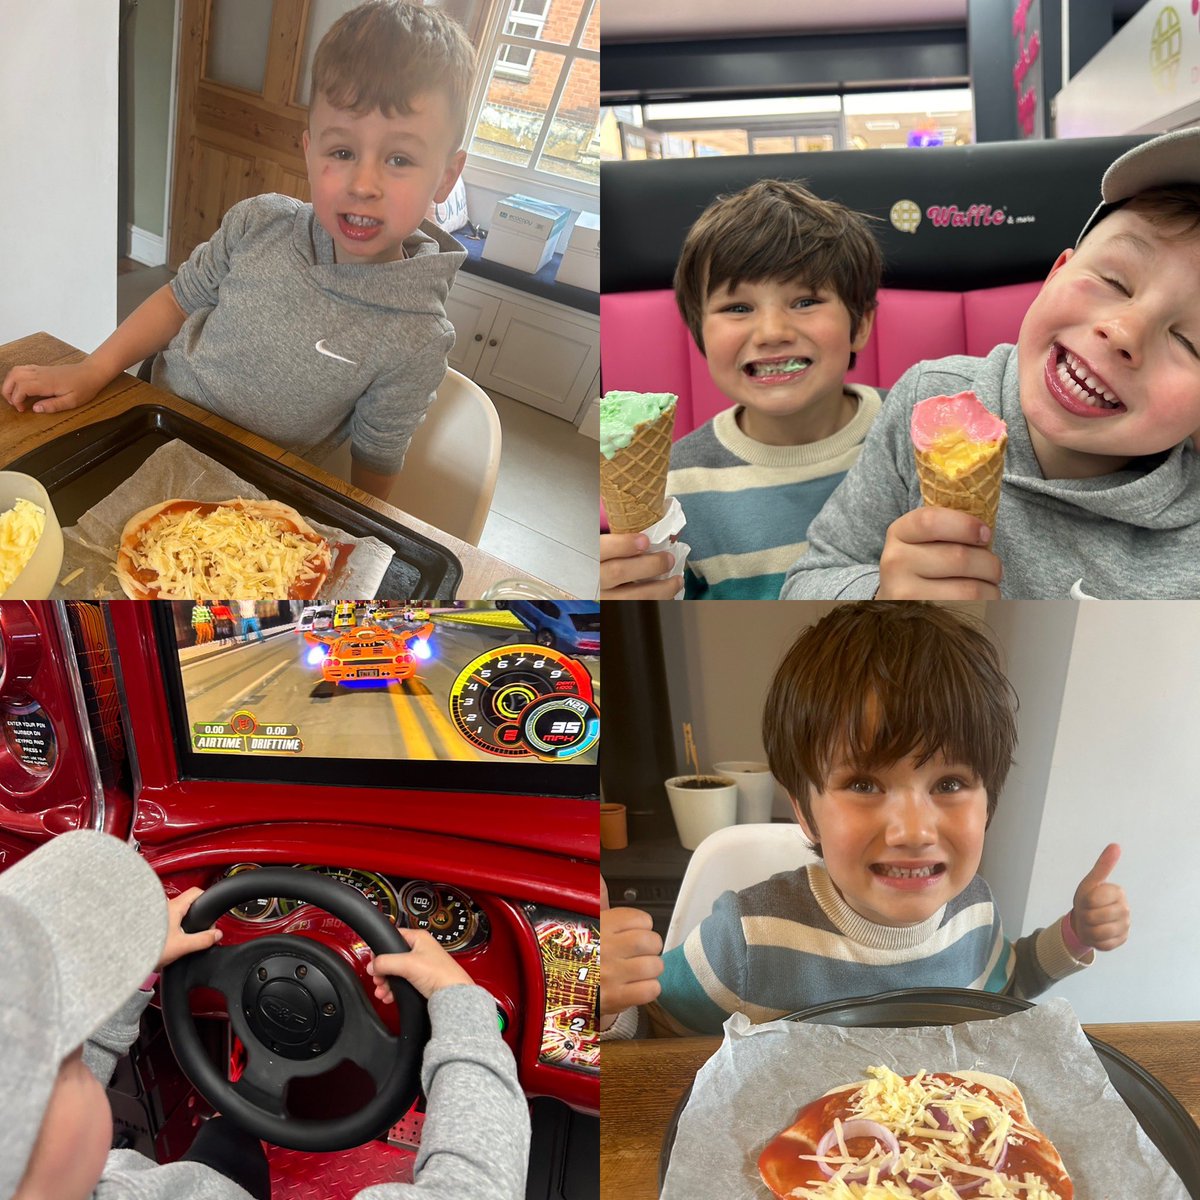 Rain ☔️  = Pizza making, arcades and ice cream  🍦 🍕 (and a sneaky bit of work 😉)